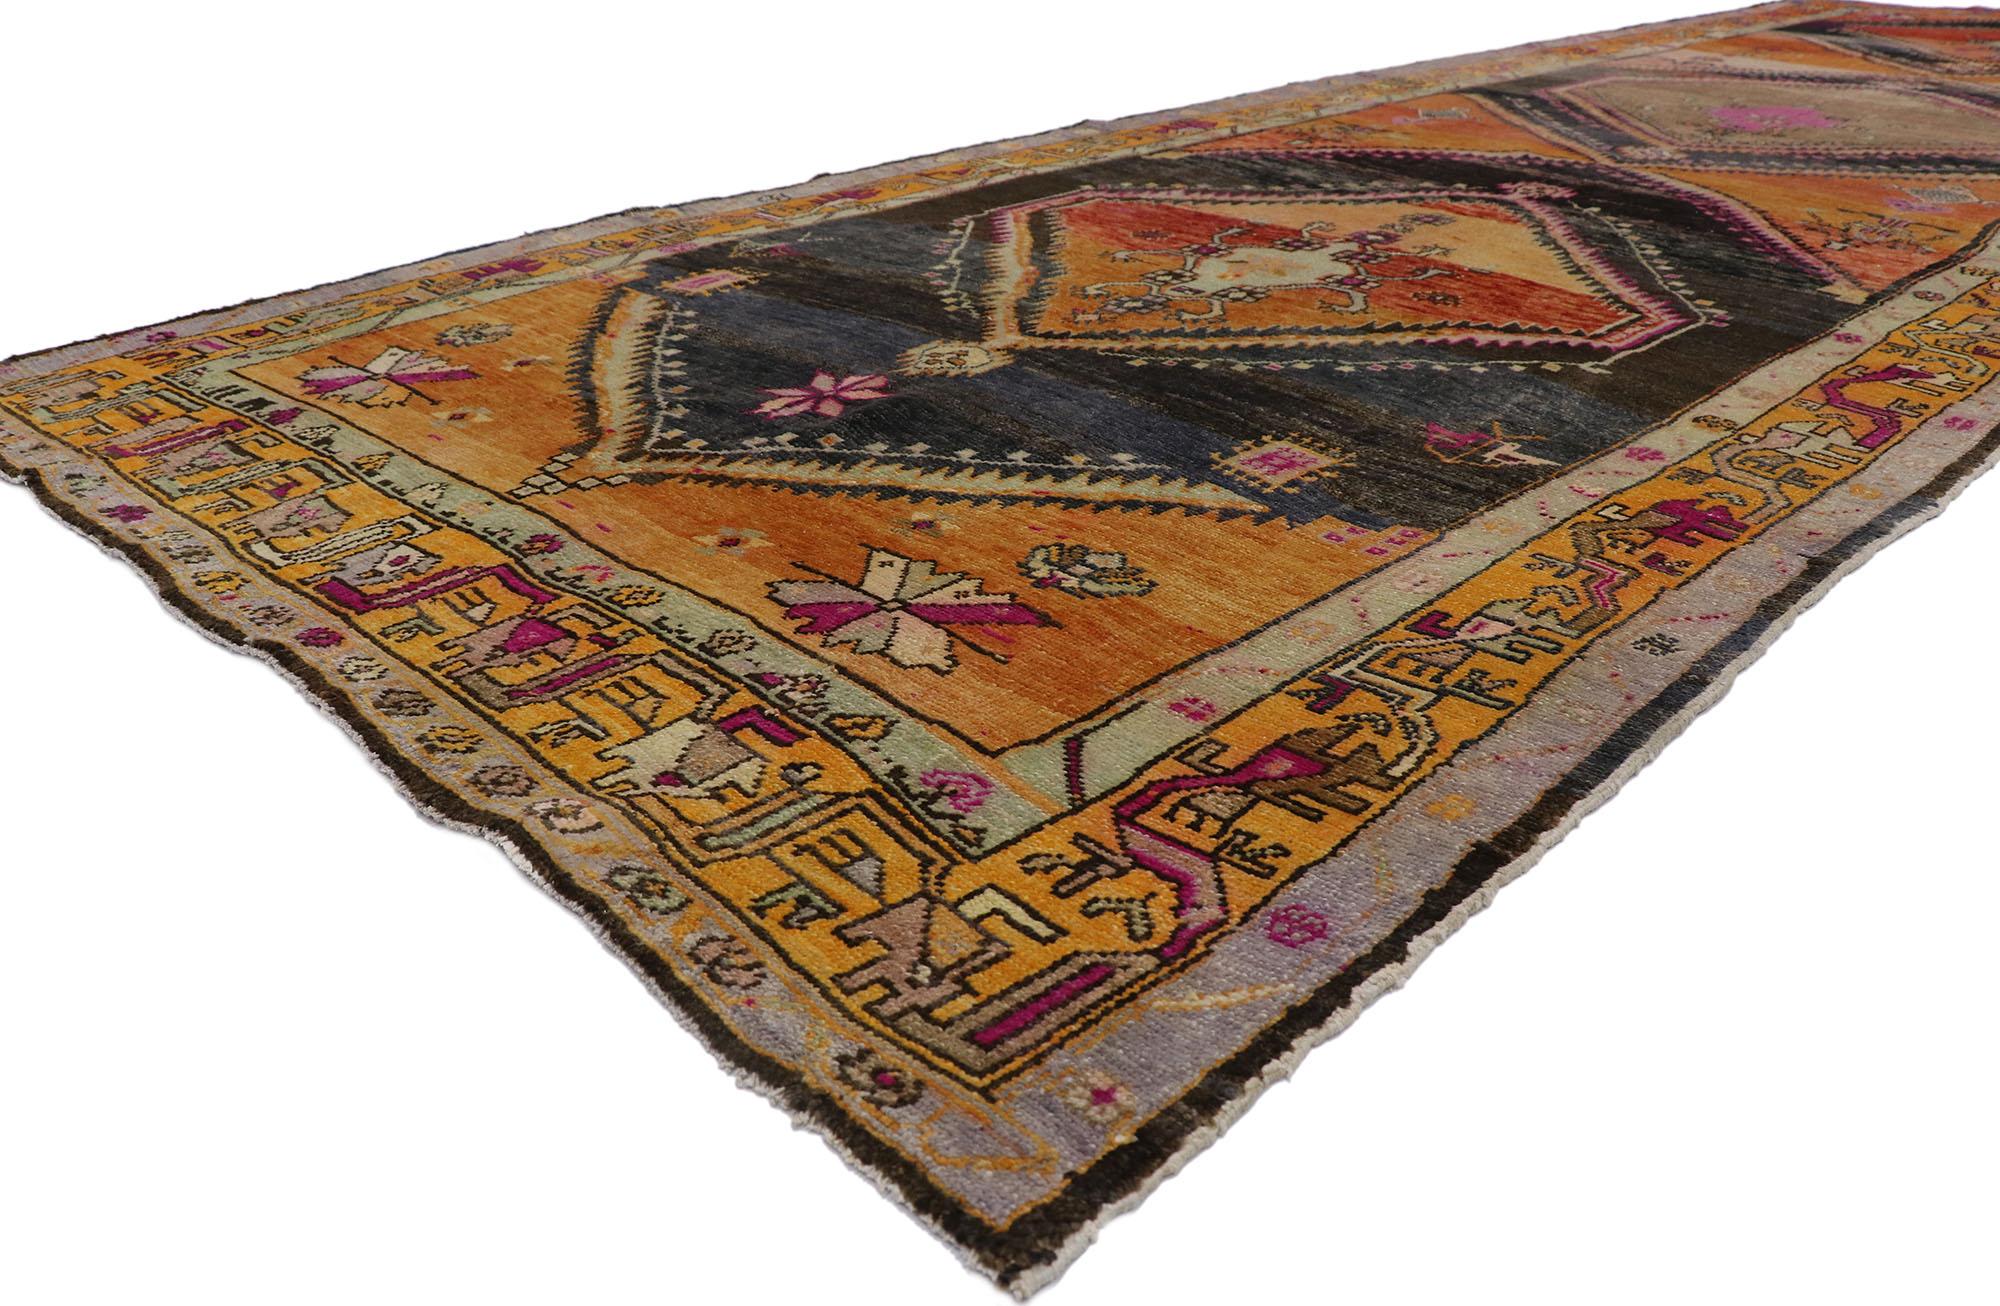 53574 Vintage Turkish Kars Gallery rug with Mid-Century Modern Style 06'01 x 18'03. Full of tiny details and a bold expressive design combined with vibrant colors and modern style, this hand-knotted wool vintage Turkish Kars gallery rug is a